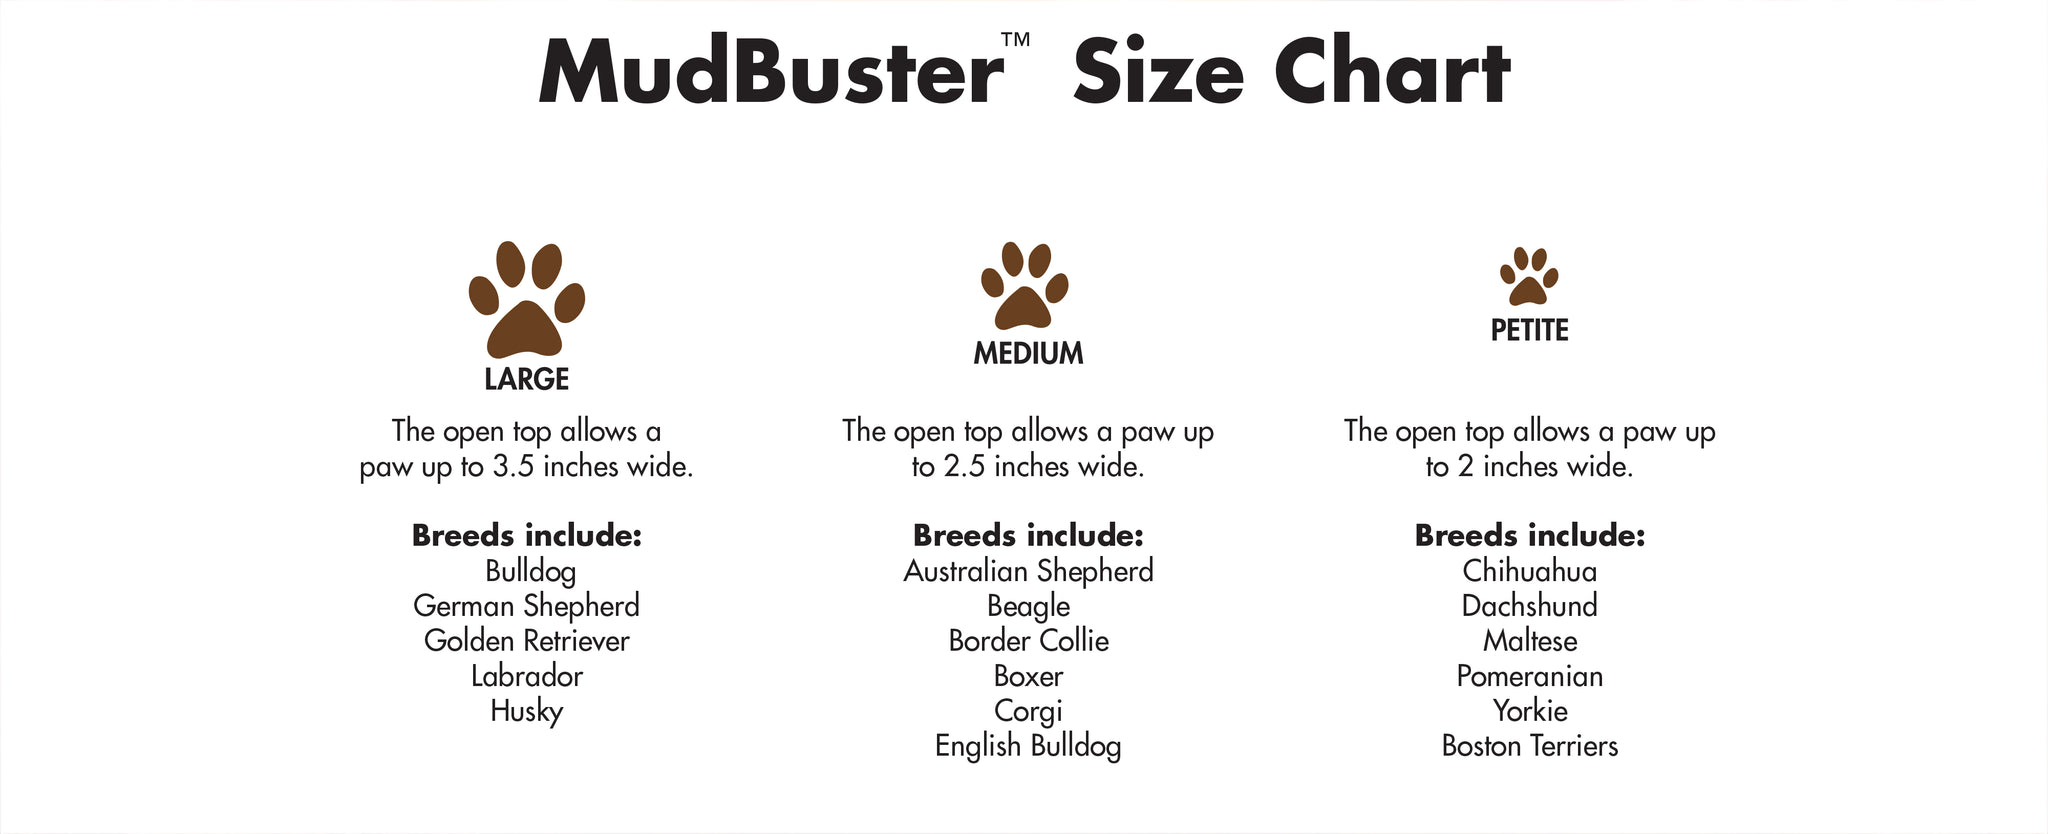 The MudBuster